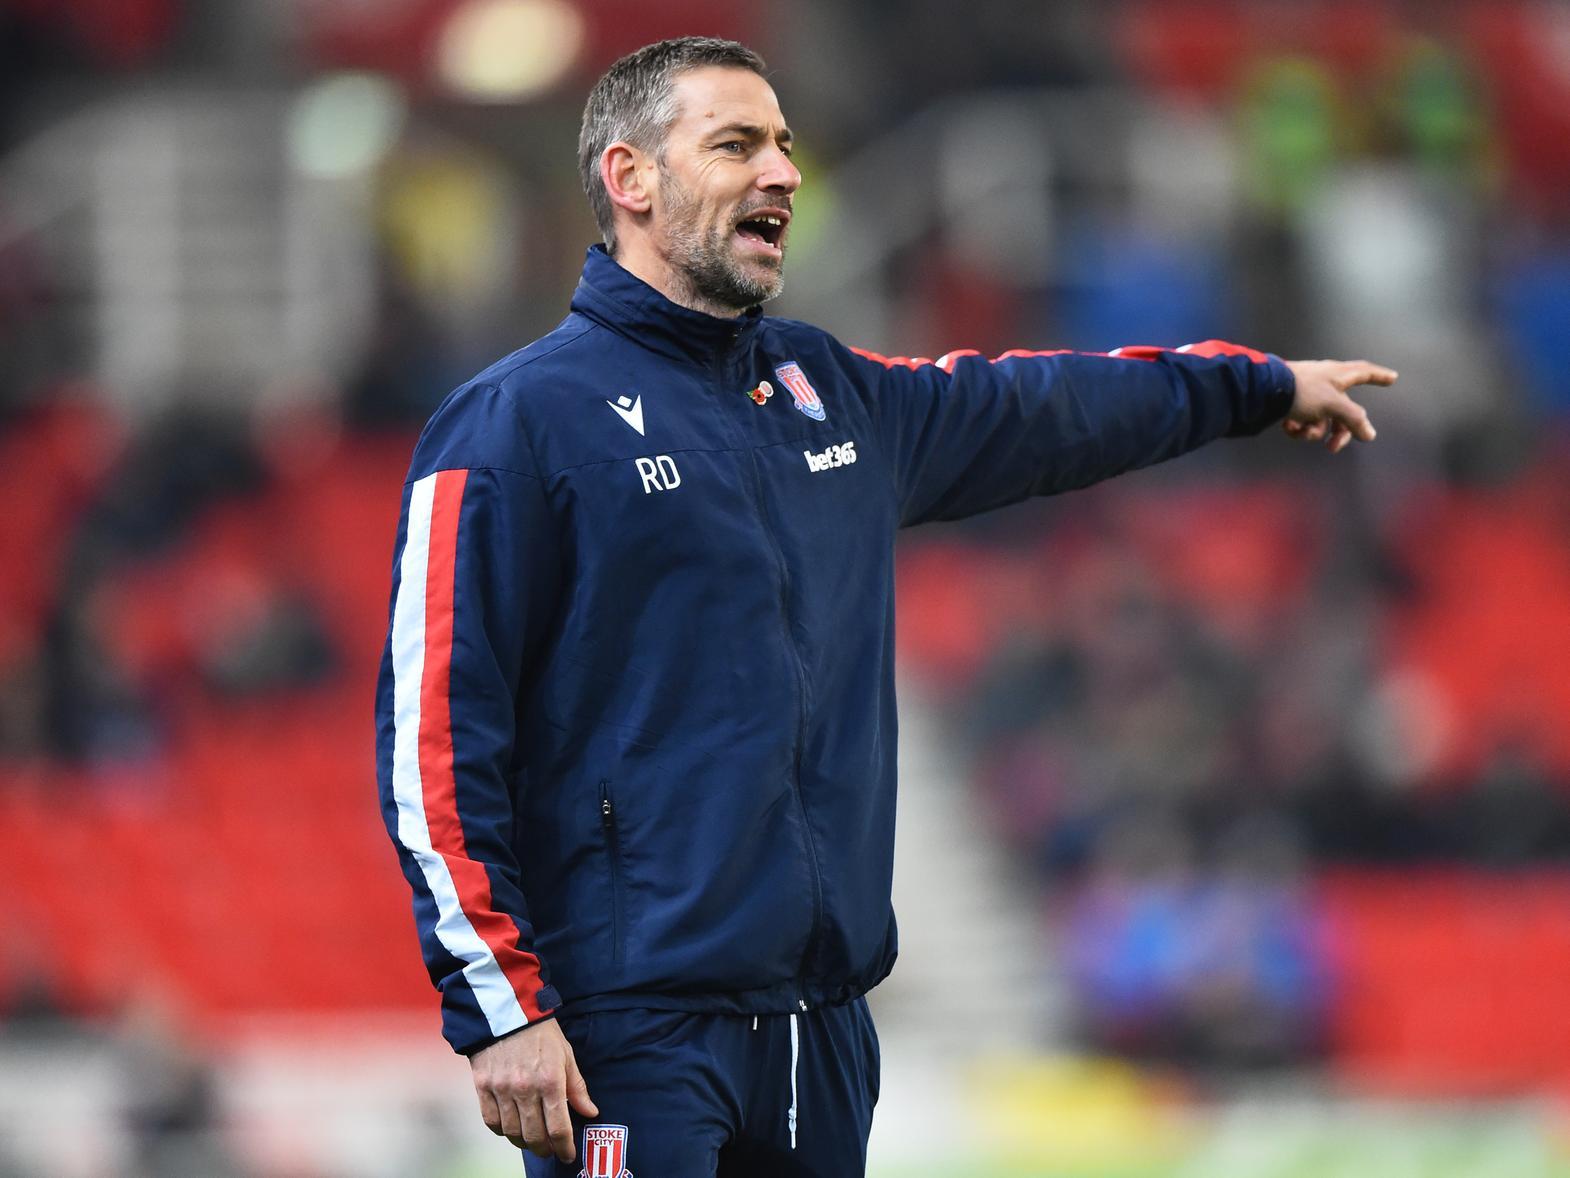 Stoke City's caretaker manager Rory Delap has claimed he's feeling "heartbroken" by the club's fall from grace, as the bottom-of-the-league side continue to struggle in the Championship. (BBC Sport)